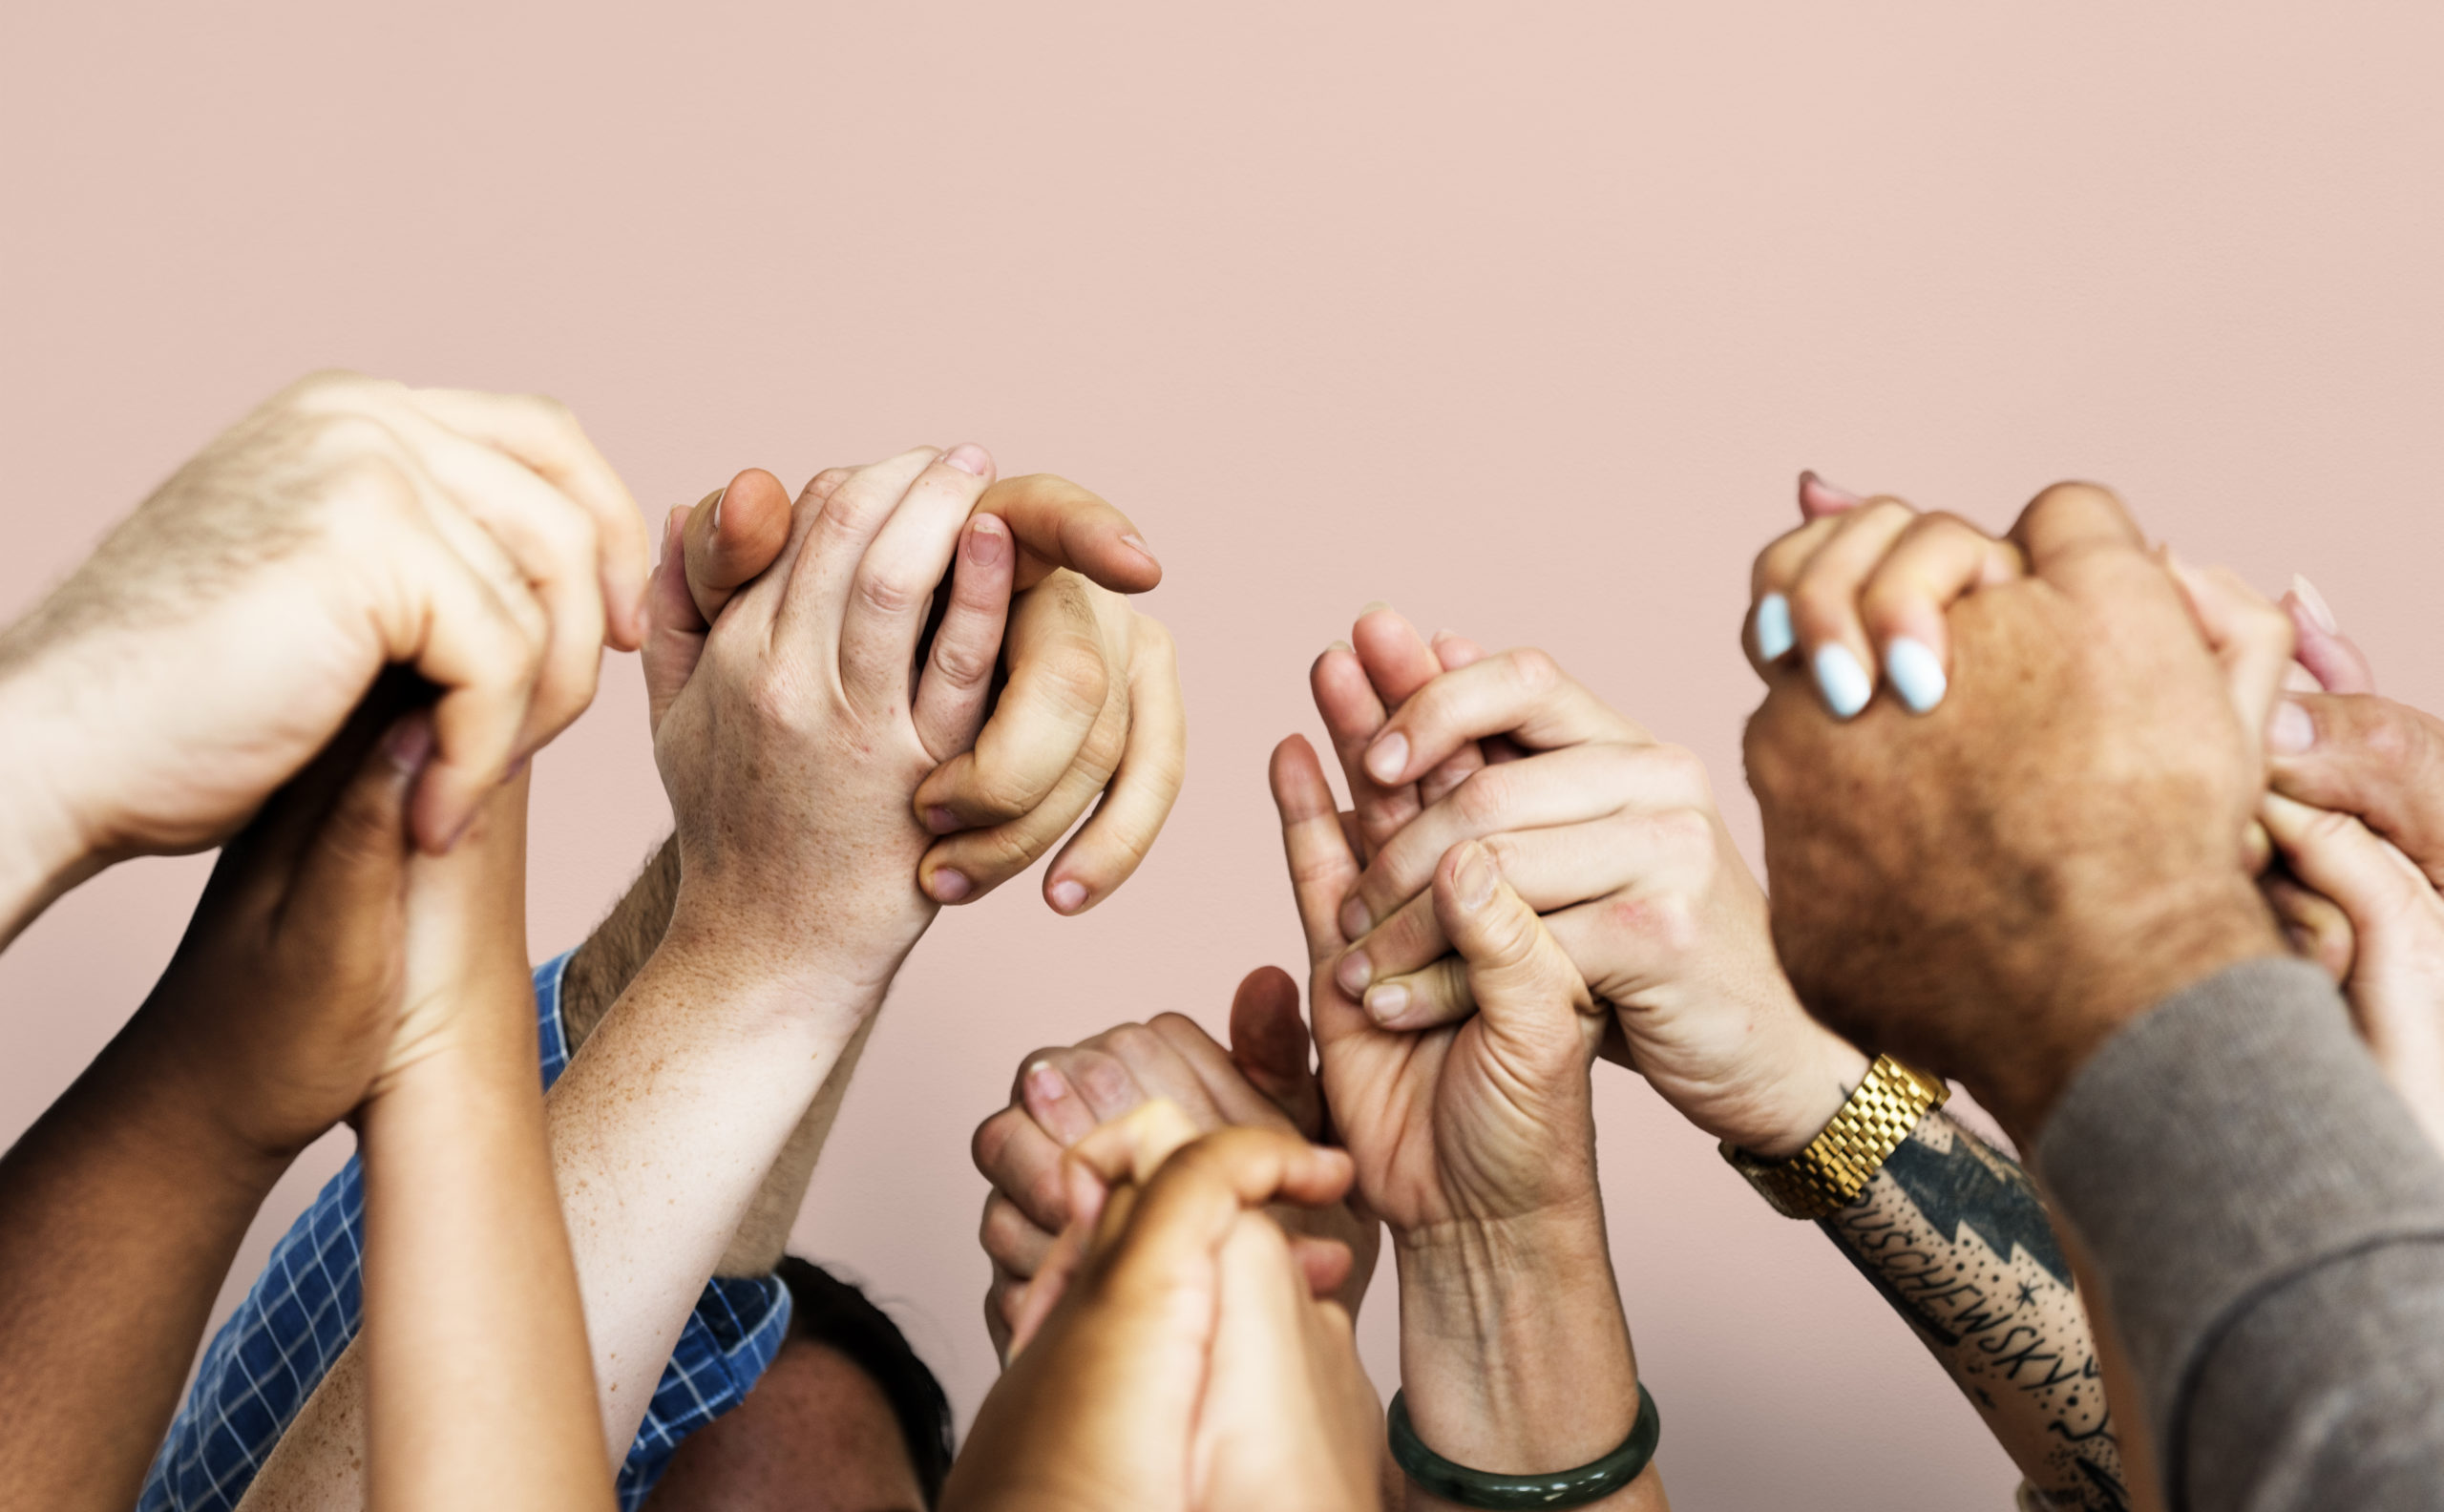 image of a diverse group of hands holding each other in front of a pink background